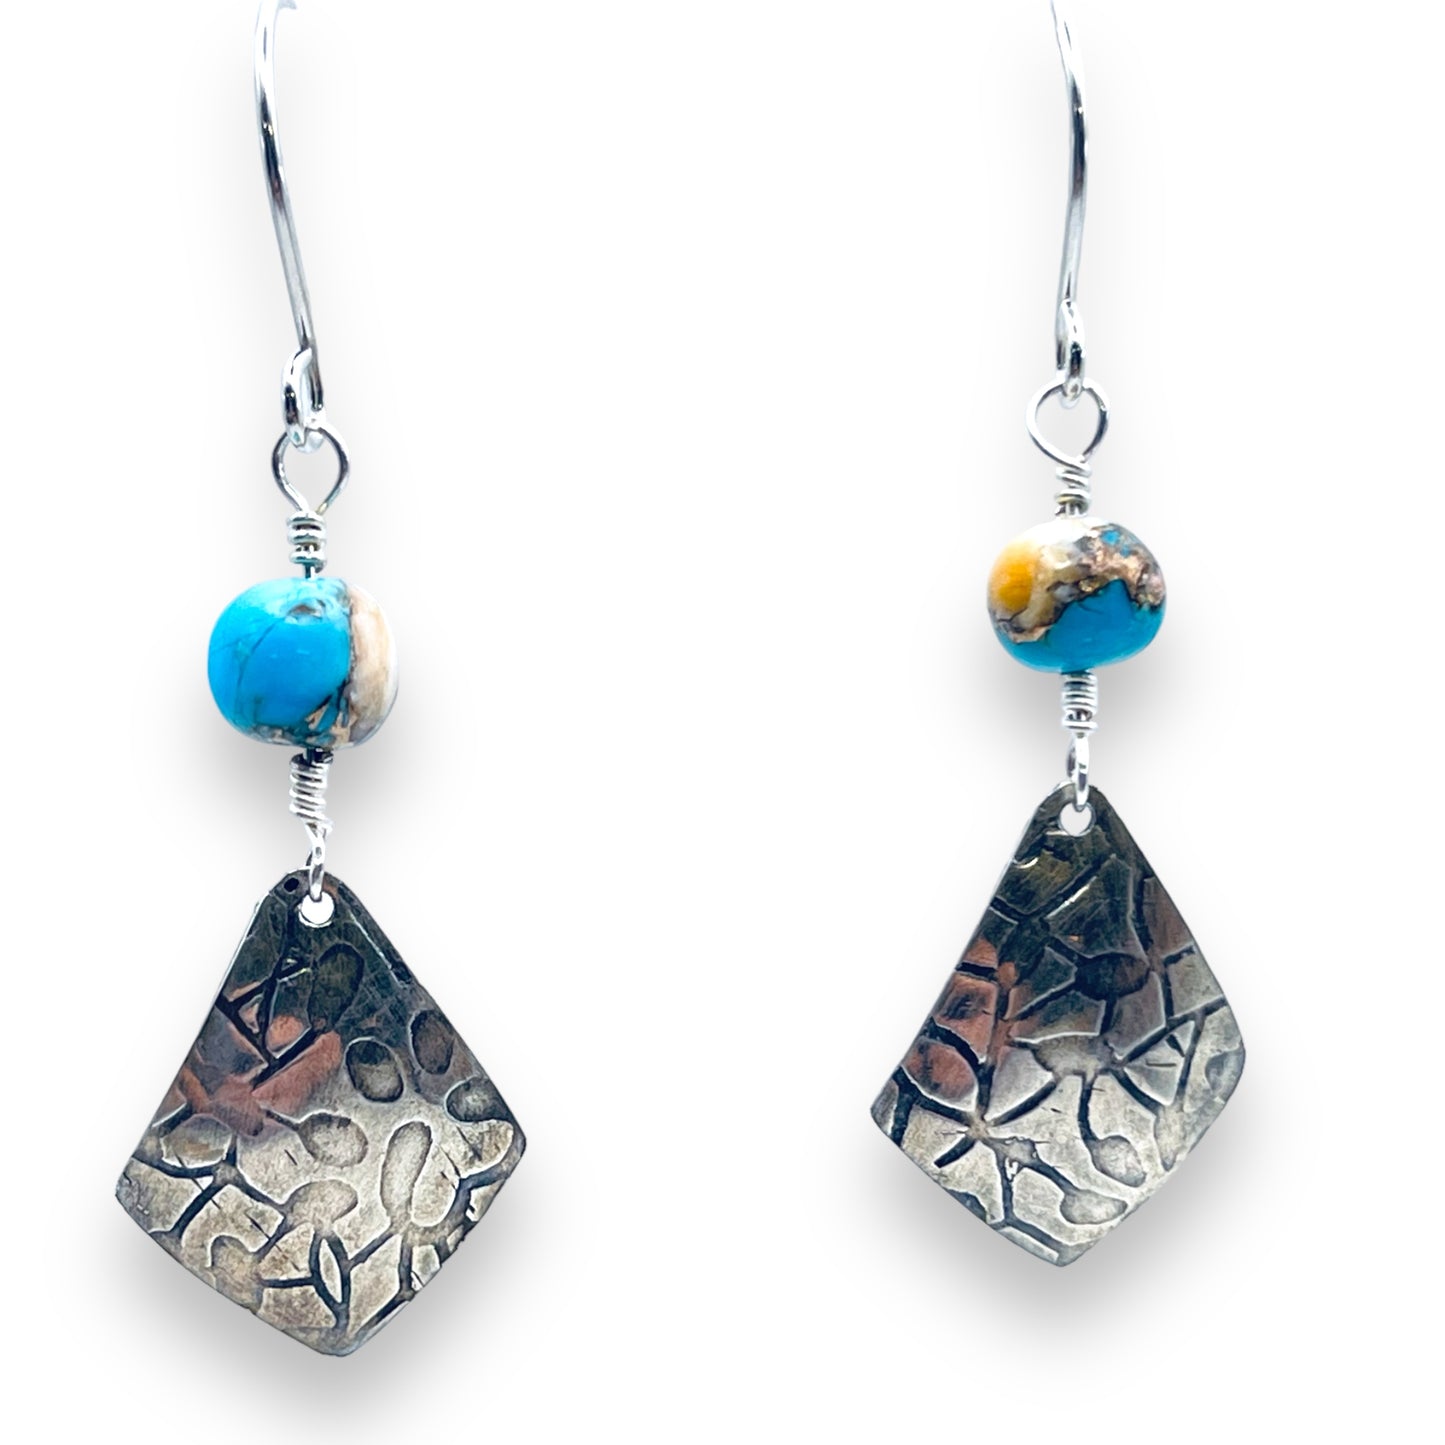 Silver and Turquoise drop earrings